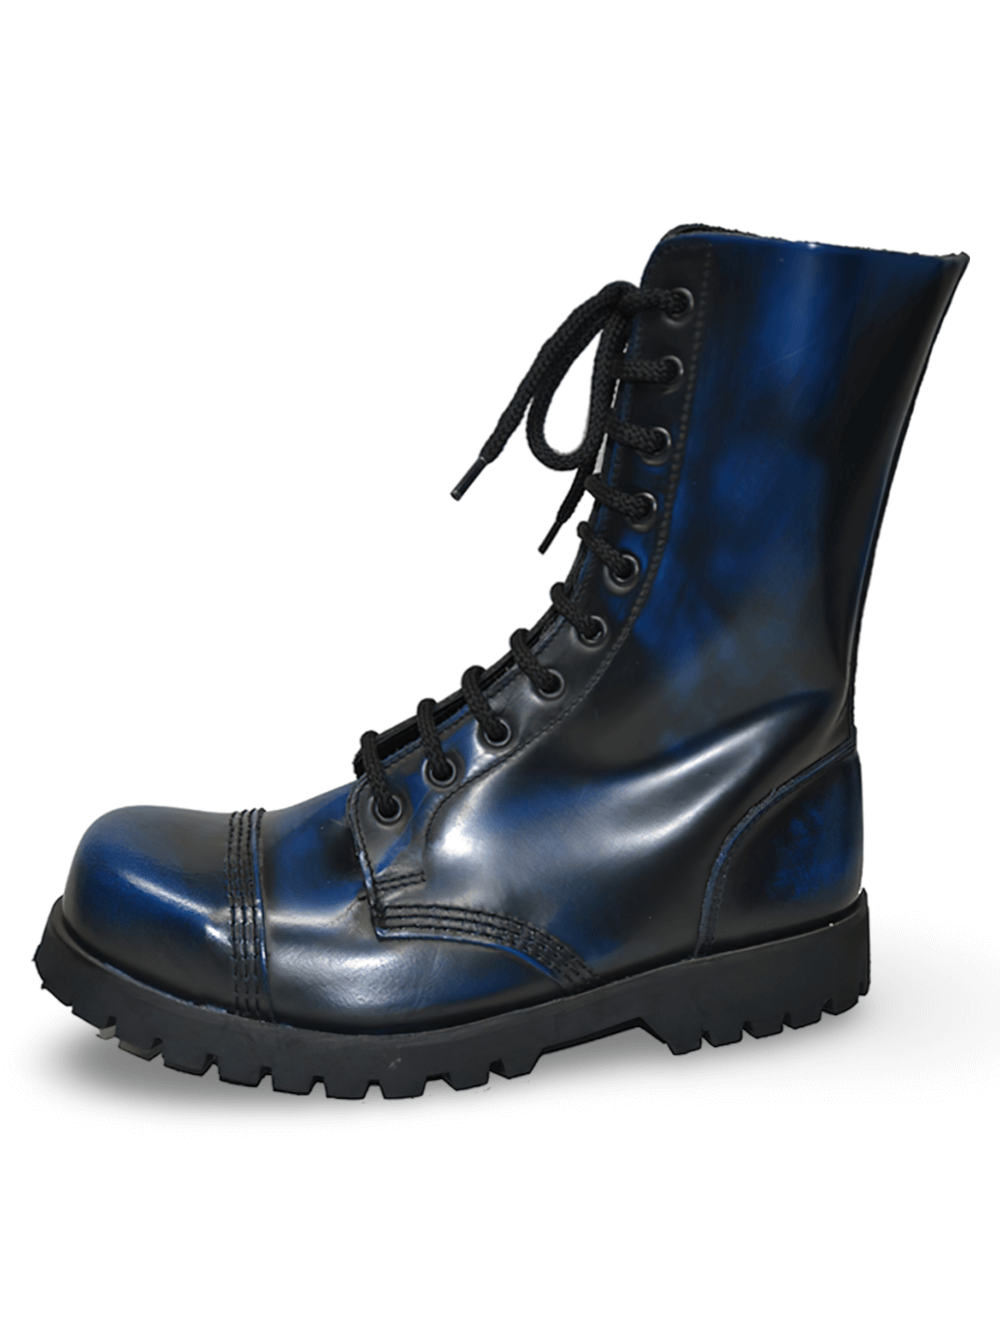 Unisex Military Leather Ranger Boots with Steel Toe